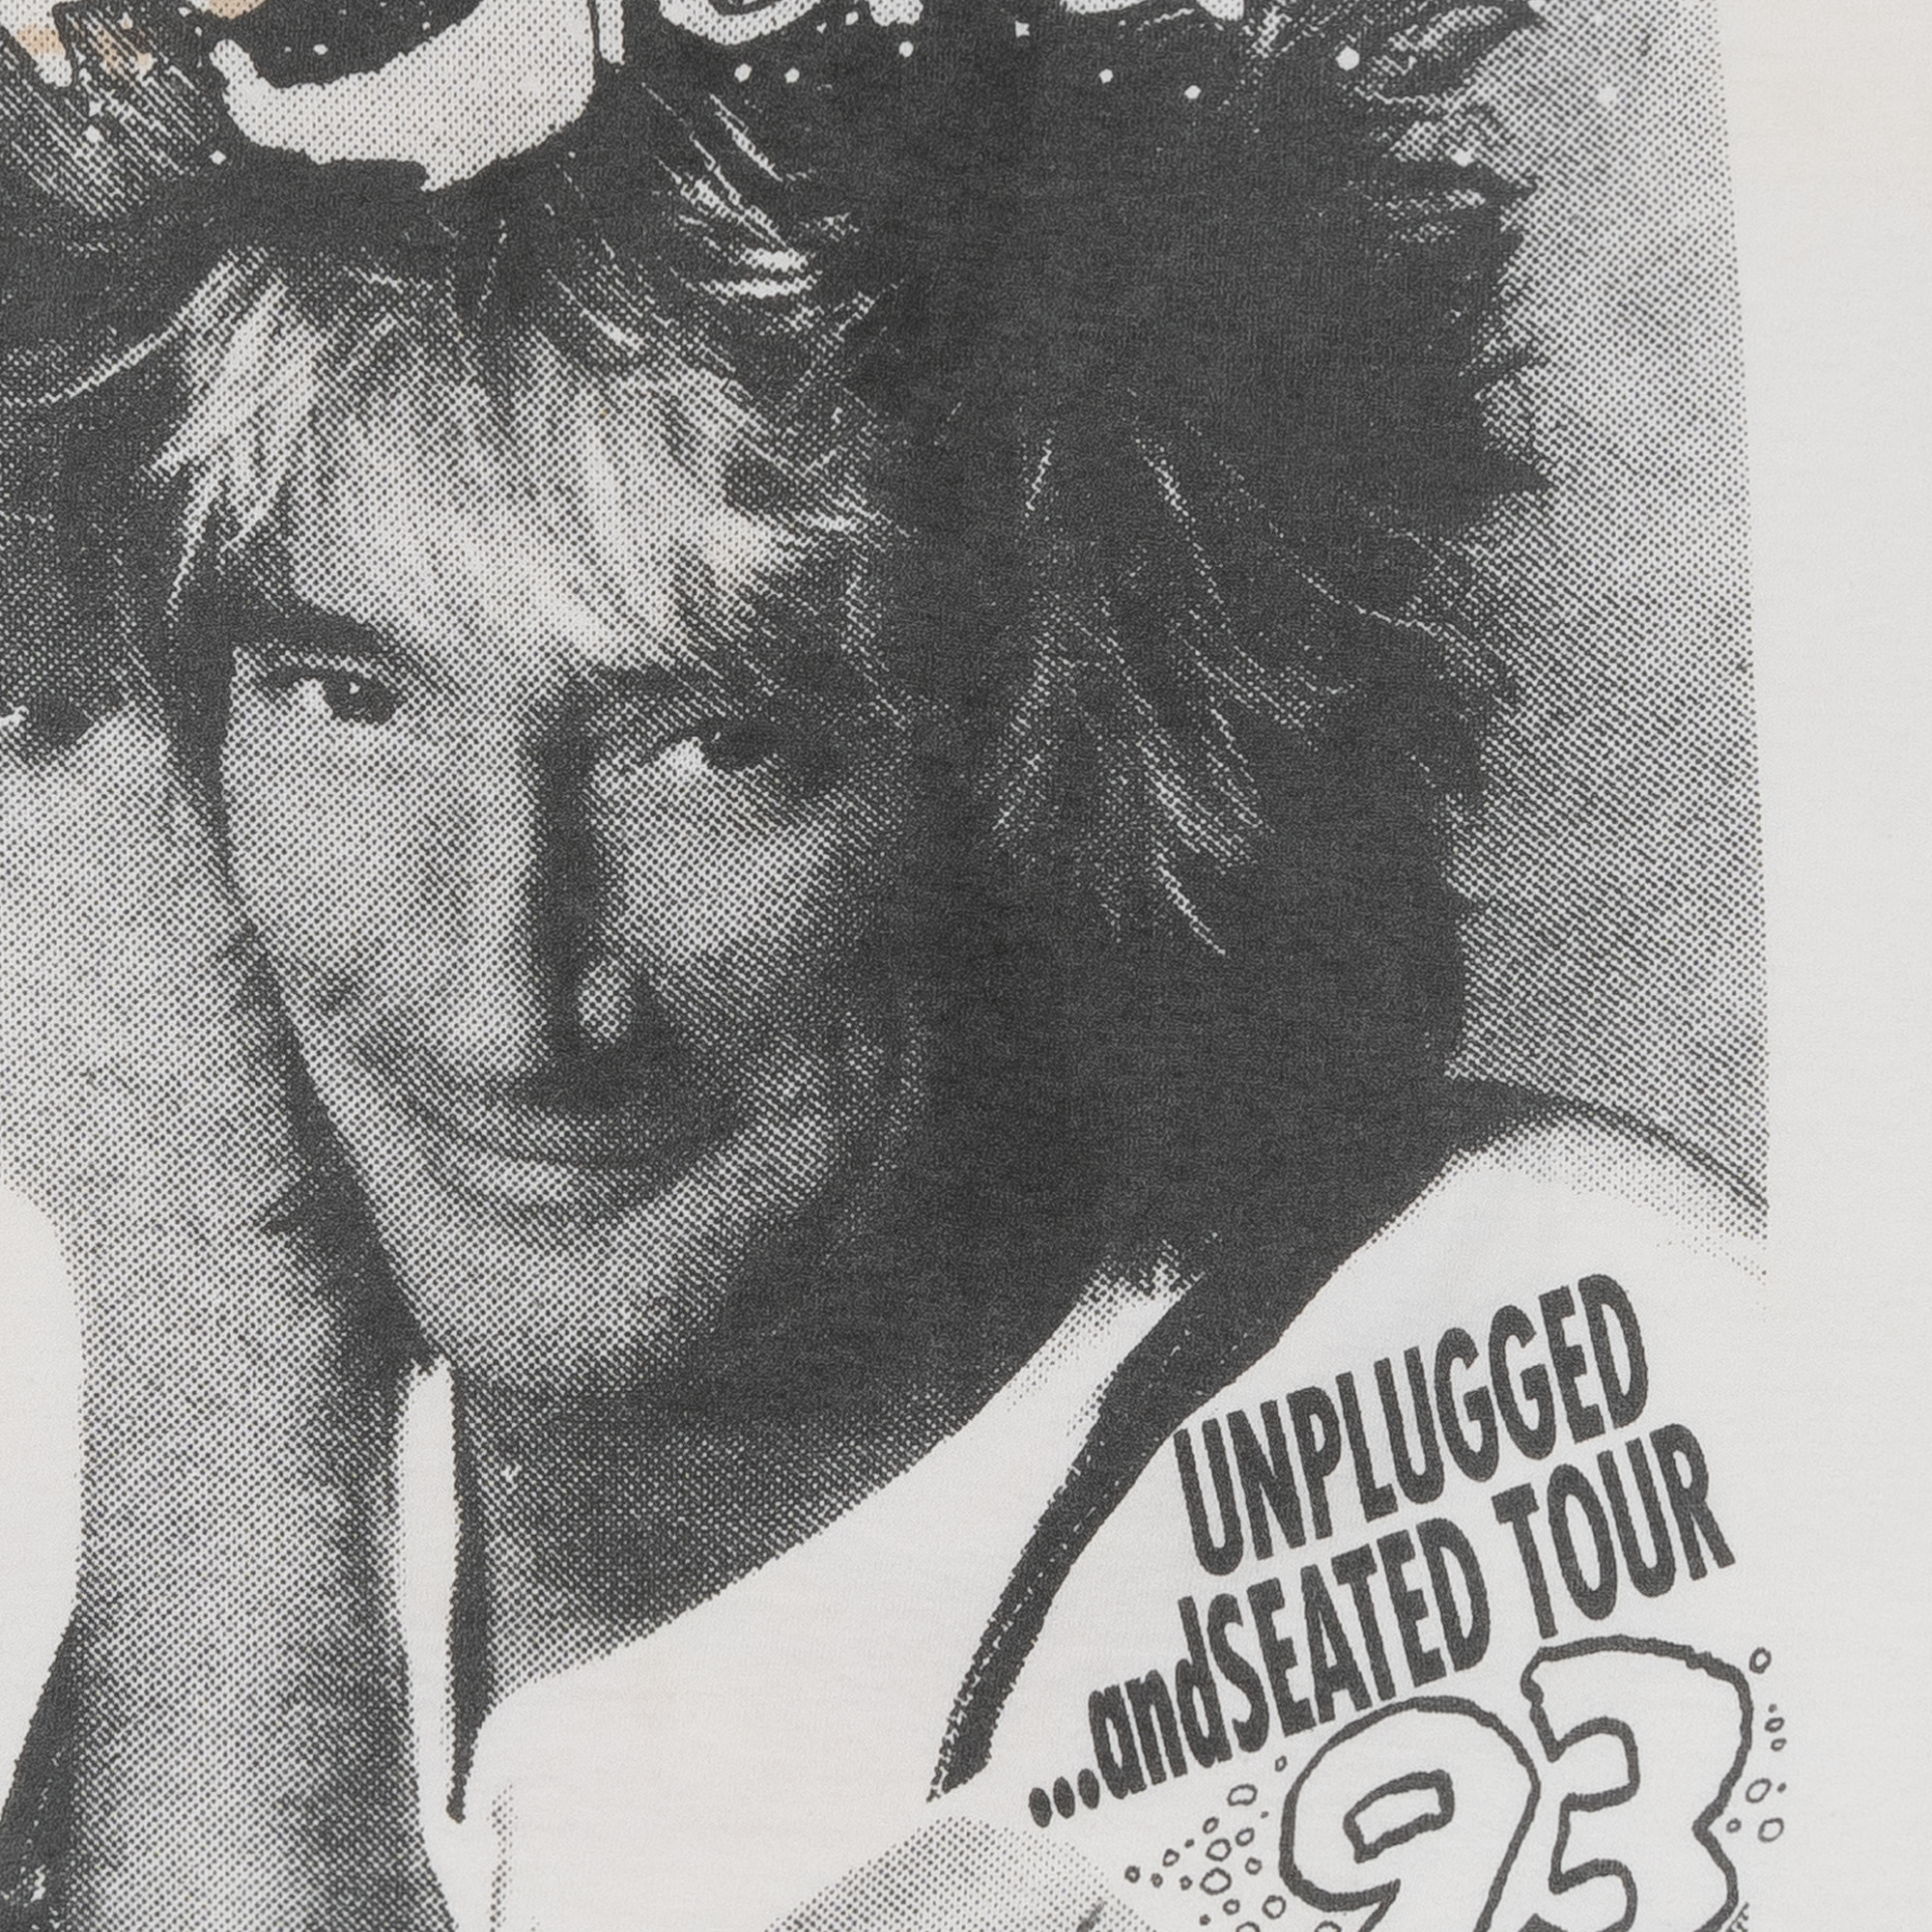 Rod Stewart "Unplugged and Seated" Tour Tank Top White-PLUS